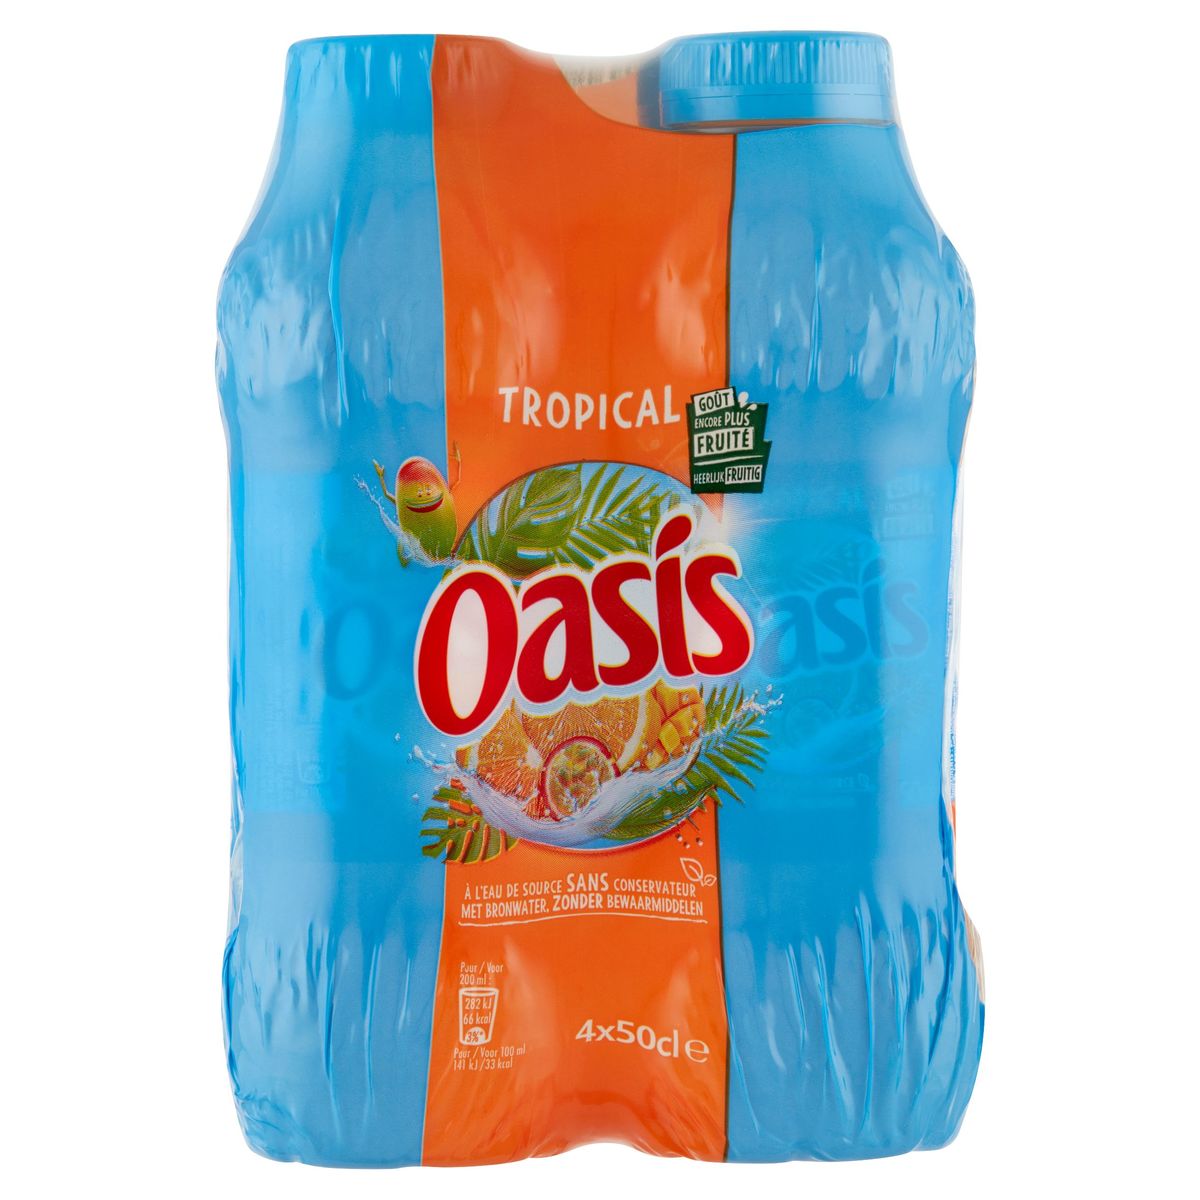 Oasis Tropical 4 x 50 cl